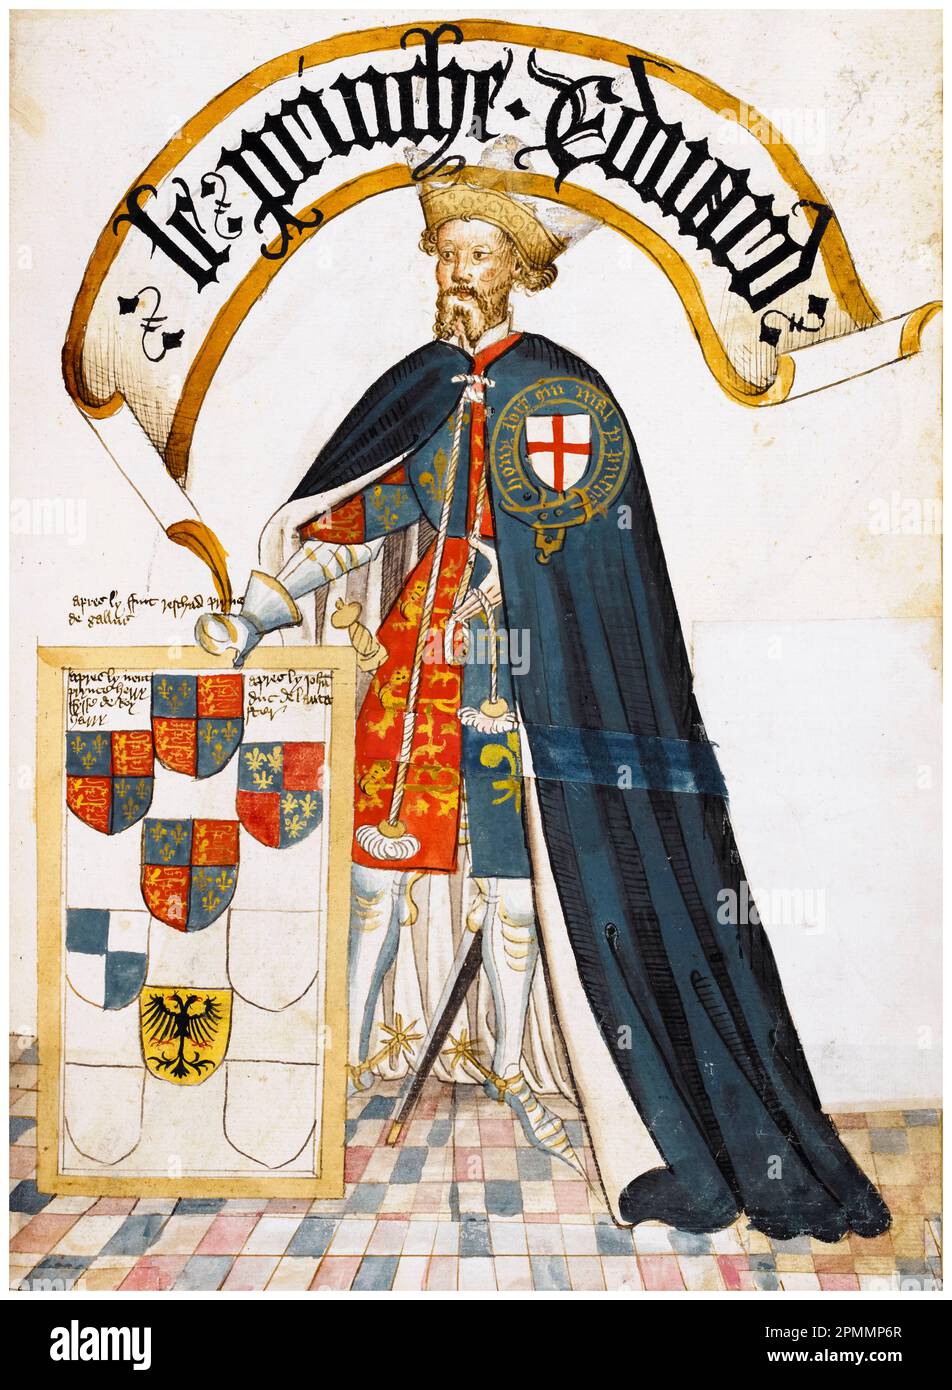 Edward of Woodstock, The Black Prince (1330-1376), wearing a blue mantle decorated with the Order of the Garter, illuminated manuscript portrait painting by William Bruges, 1430-1440 Stock Photo